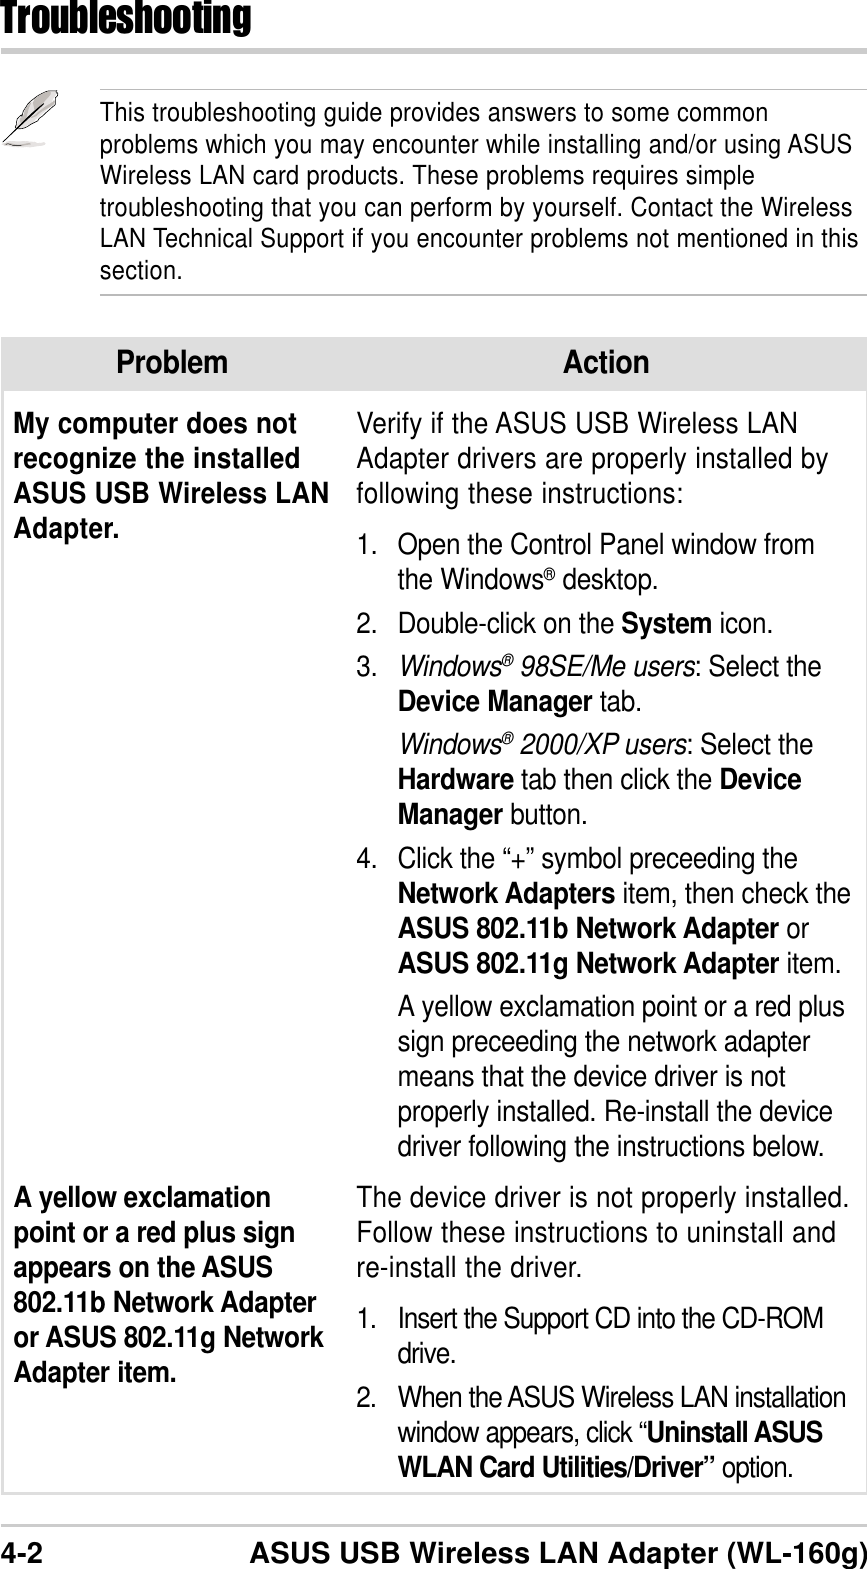 4-2 ASUS USB Wireless LAN Adapter (WL-160g)TroubleshootingProblem ActionMy computer does notrecognize the installedASUS USB Wireless LANAdapter.Verify if the ASUS USB Wireless LANAdapter drivers are properly installed byfollowing these instructions:1. Open the Control Panel window fromthe Windows® desktop.2. Double-click on the System icon.3. Windows® 98SE/Me users: Select theDevice Manager tab.Windows® 2000/XP users: Select theHardware tab then click the DeviceManager button.4. Click the “+” symbol preceeding theNetwork Adapters item, then check theASUS 802.11b Network Adapter orASUS 802.11g Network Adapter item.A yellow exclamation point or a red plussign preceeding the network adaptermeans that the device driver is notproperly installed. Re-install the devicedriver following the instructions below.This troubleshooting guide provides answers to some commonproblems which you may encounter while installing and/or using ASUSWireless LAN card products. These problems requires simpletroubleshooting that you can perform by yourself. Contact the WirelessLAN Technical Support if you encounter problems not mentioned in thissection.A yellow exclamationpoint or a red plus signappears on the ASUS802.11b Network Adapteror ASUS 802.11g NetworkAdapter item.The device driver is not properly installed.Follow these instructions to uninstall andre-install the driver.1. Insert the Support CD into the CD-ROMdrive.2. When the ASUS Wireless LAN installationwindow appears, click “Uninstall ASUSWLAN Card Utilities/Driver” option.